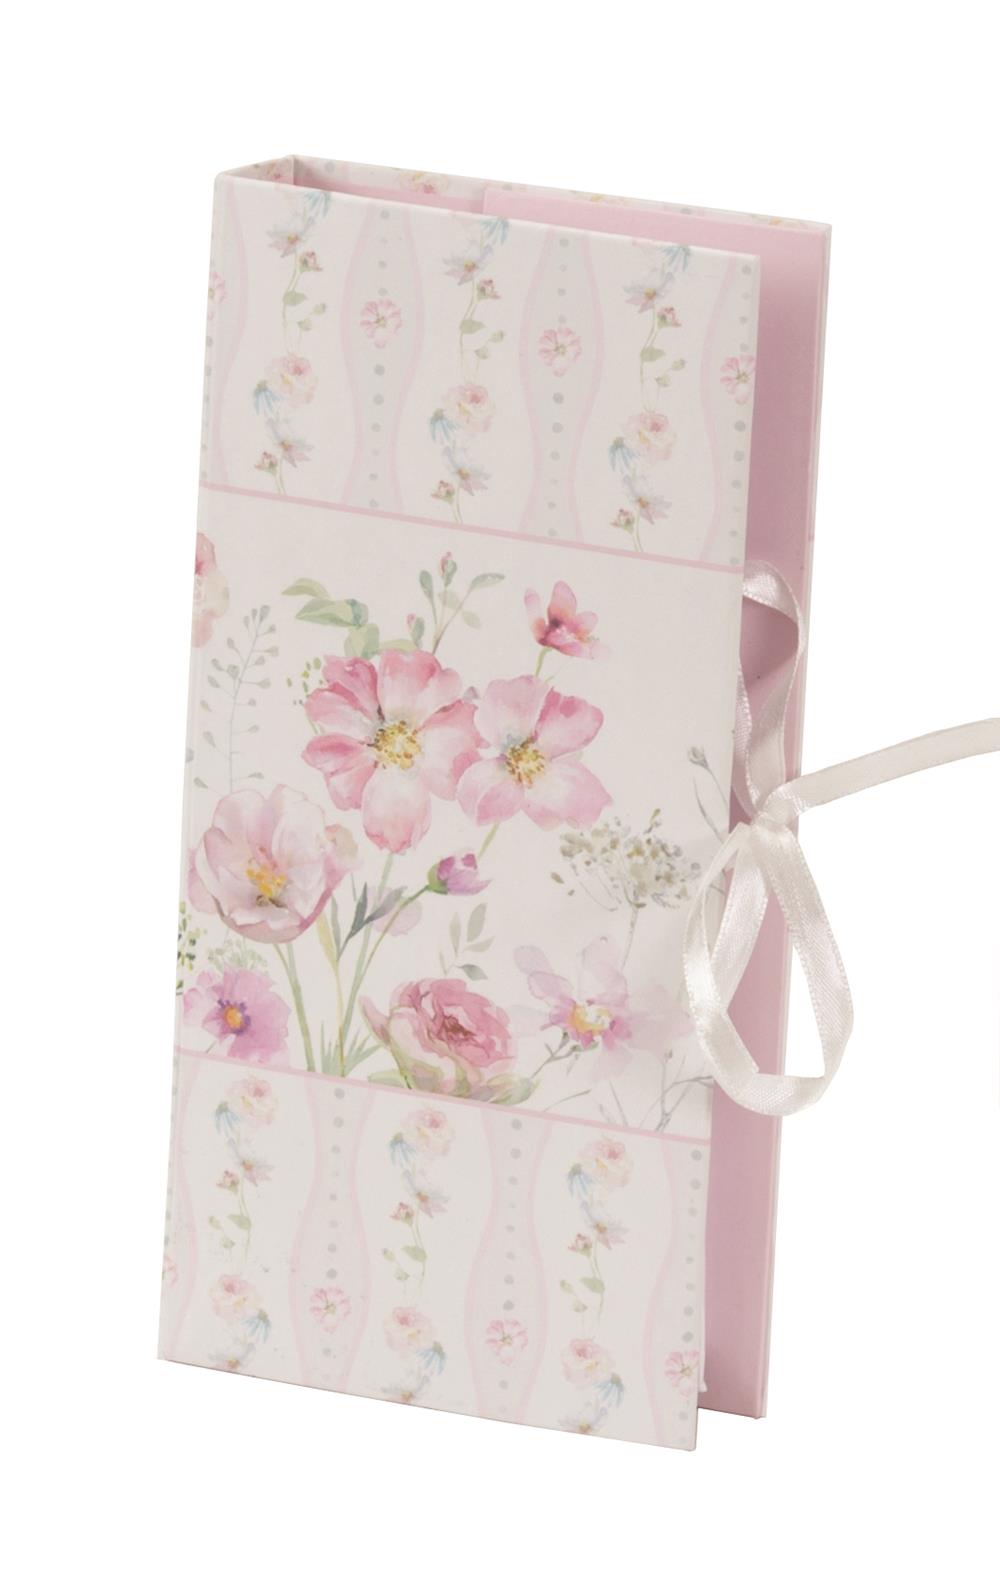 Floral design notepad and notebook set